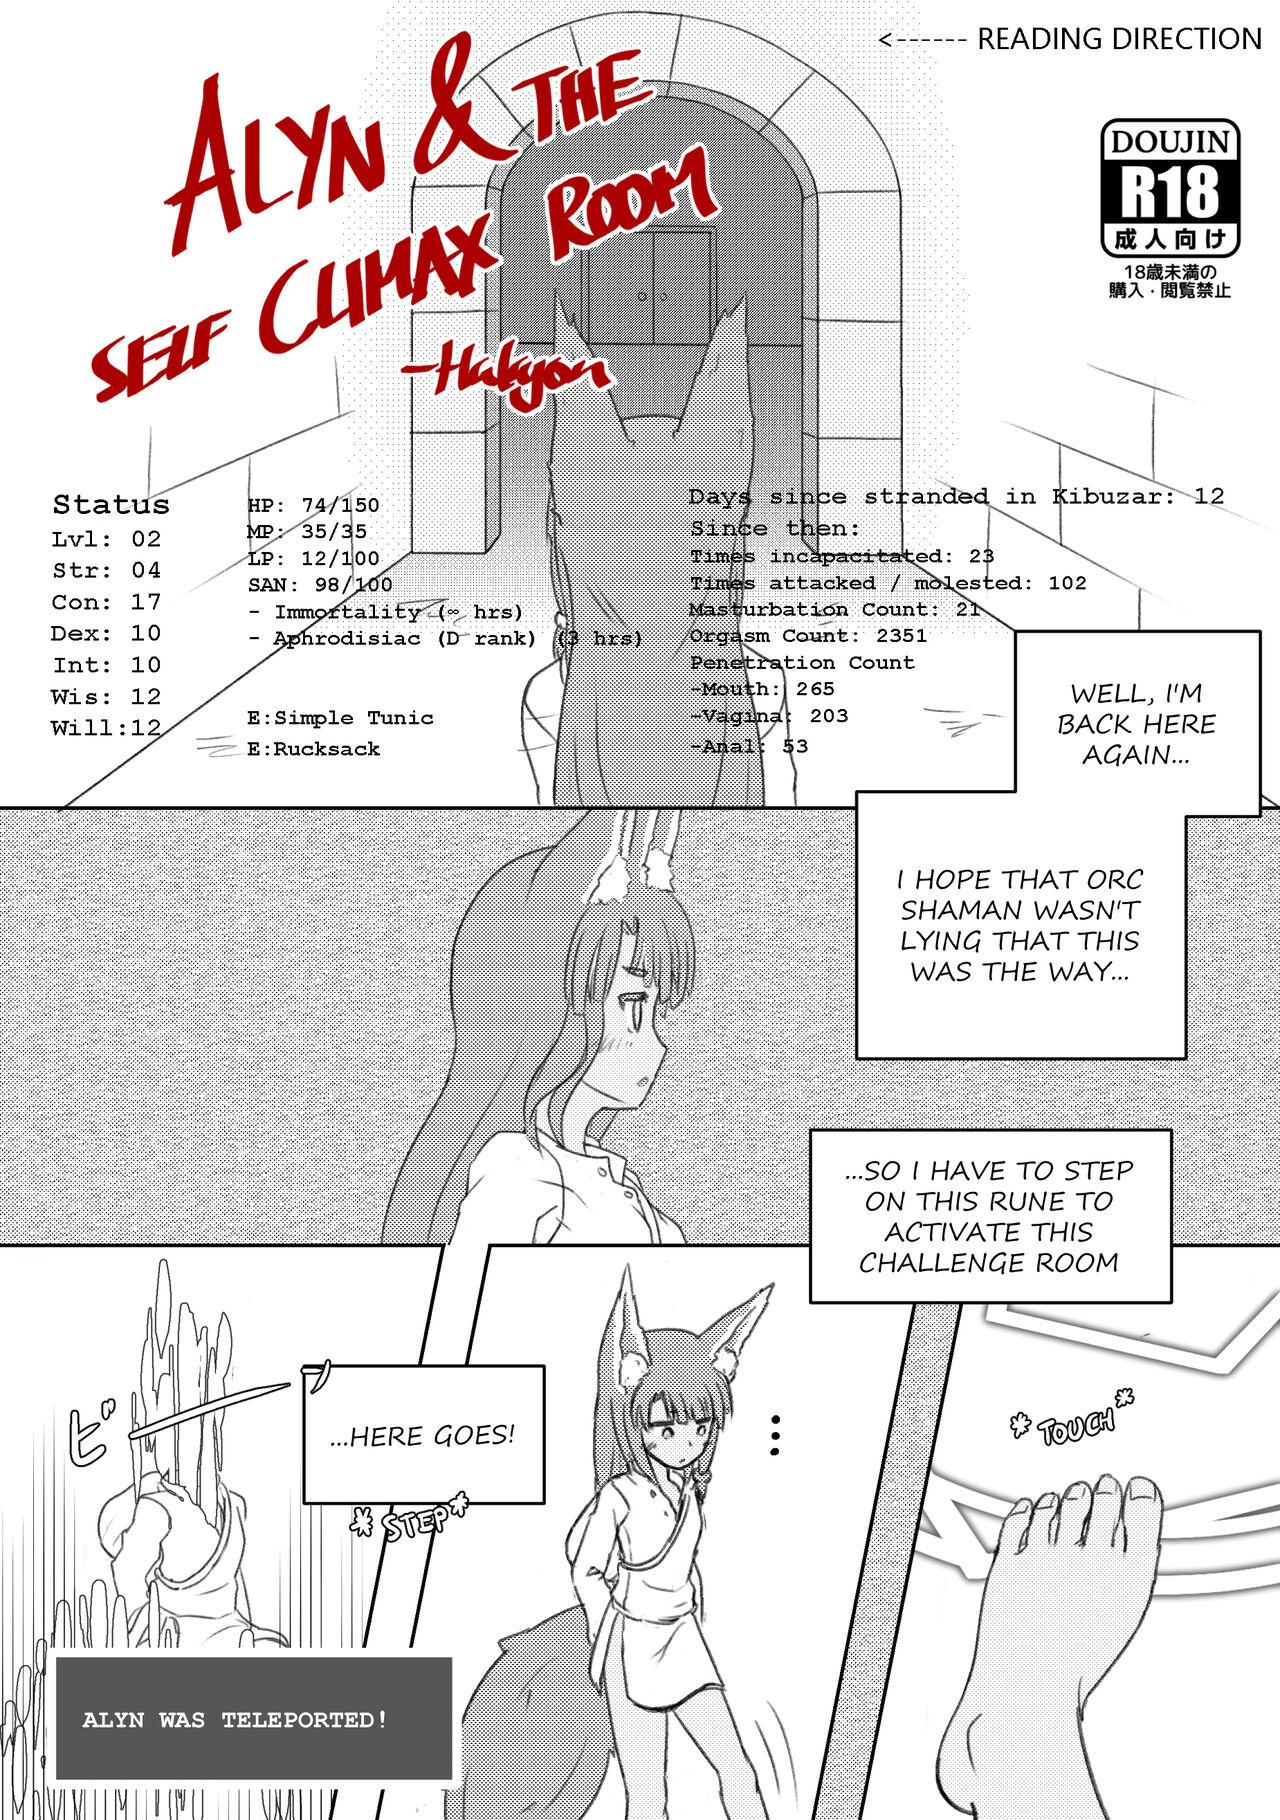 Special Locations Alyn & The Self Climax Room - Ero trap dungeon Cogiendo - Page 1